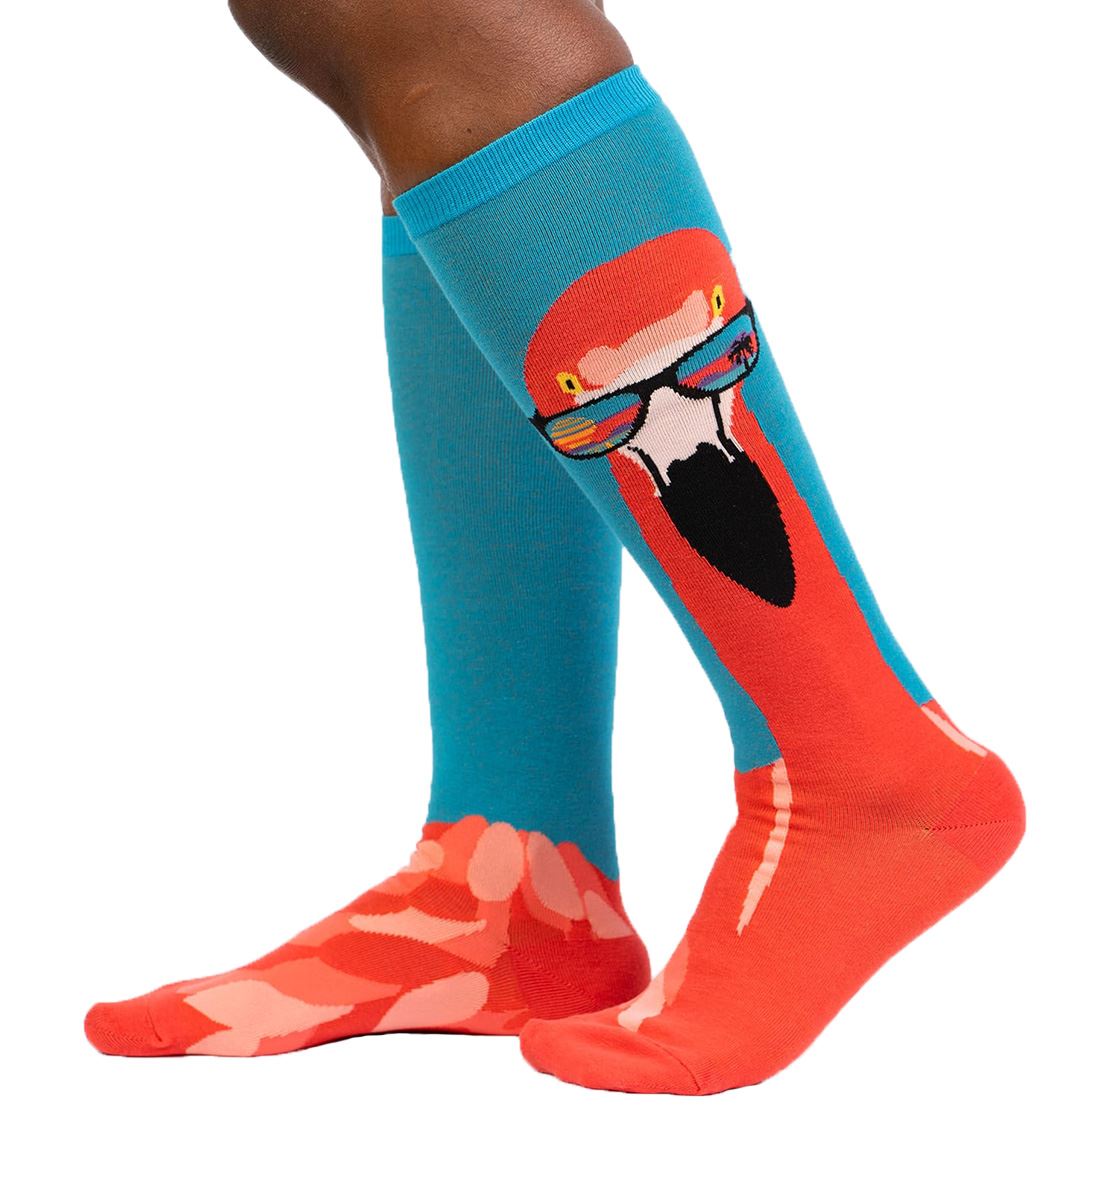 SOCK it to me Unisex Knee High Socks (f0506),Ready To Flamingle - Ready To Flamingle,One Size